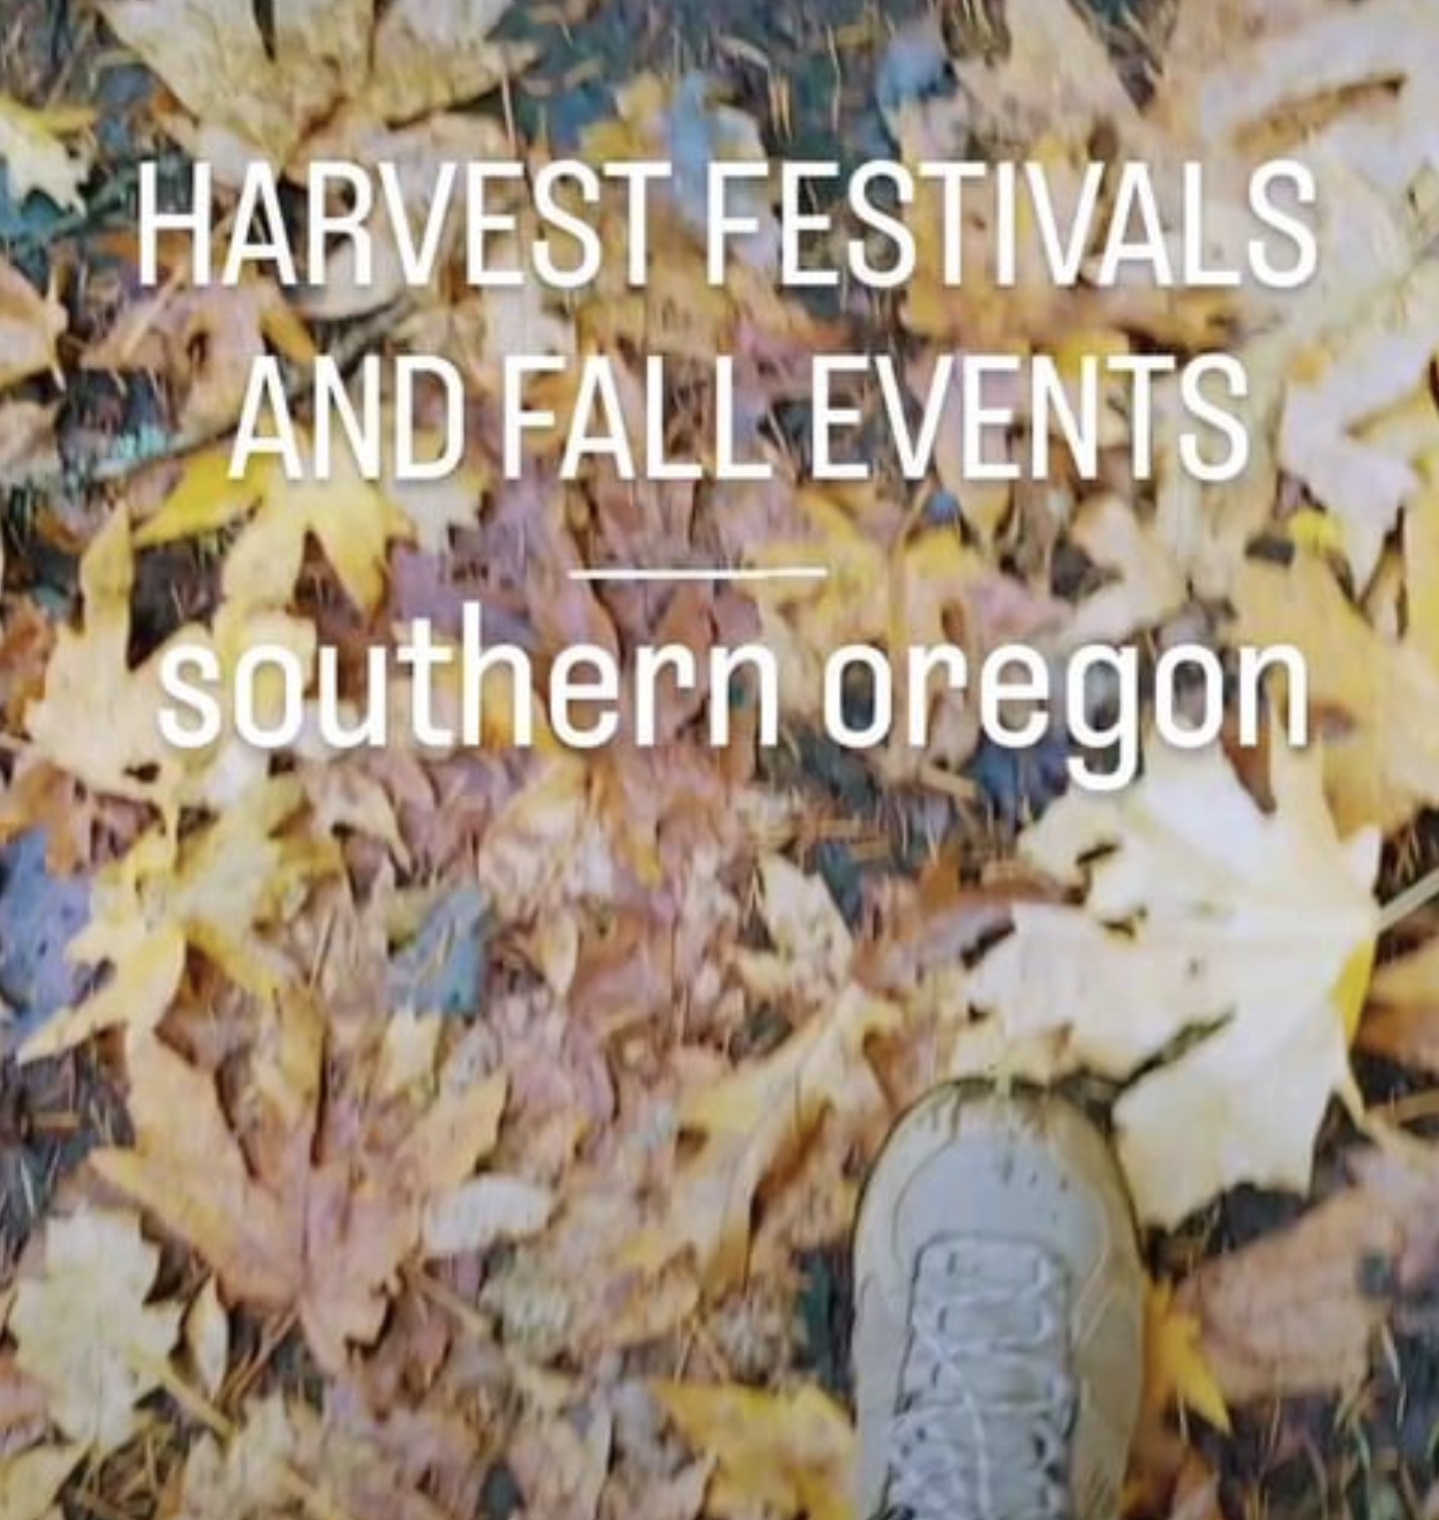 Harvest Festivals and Events